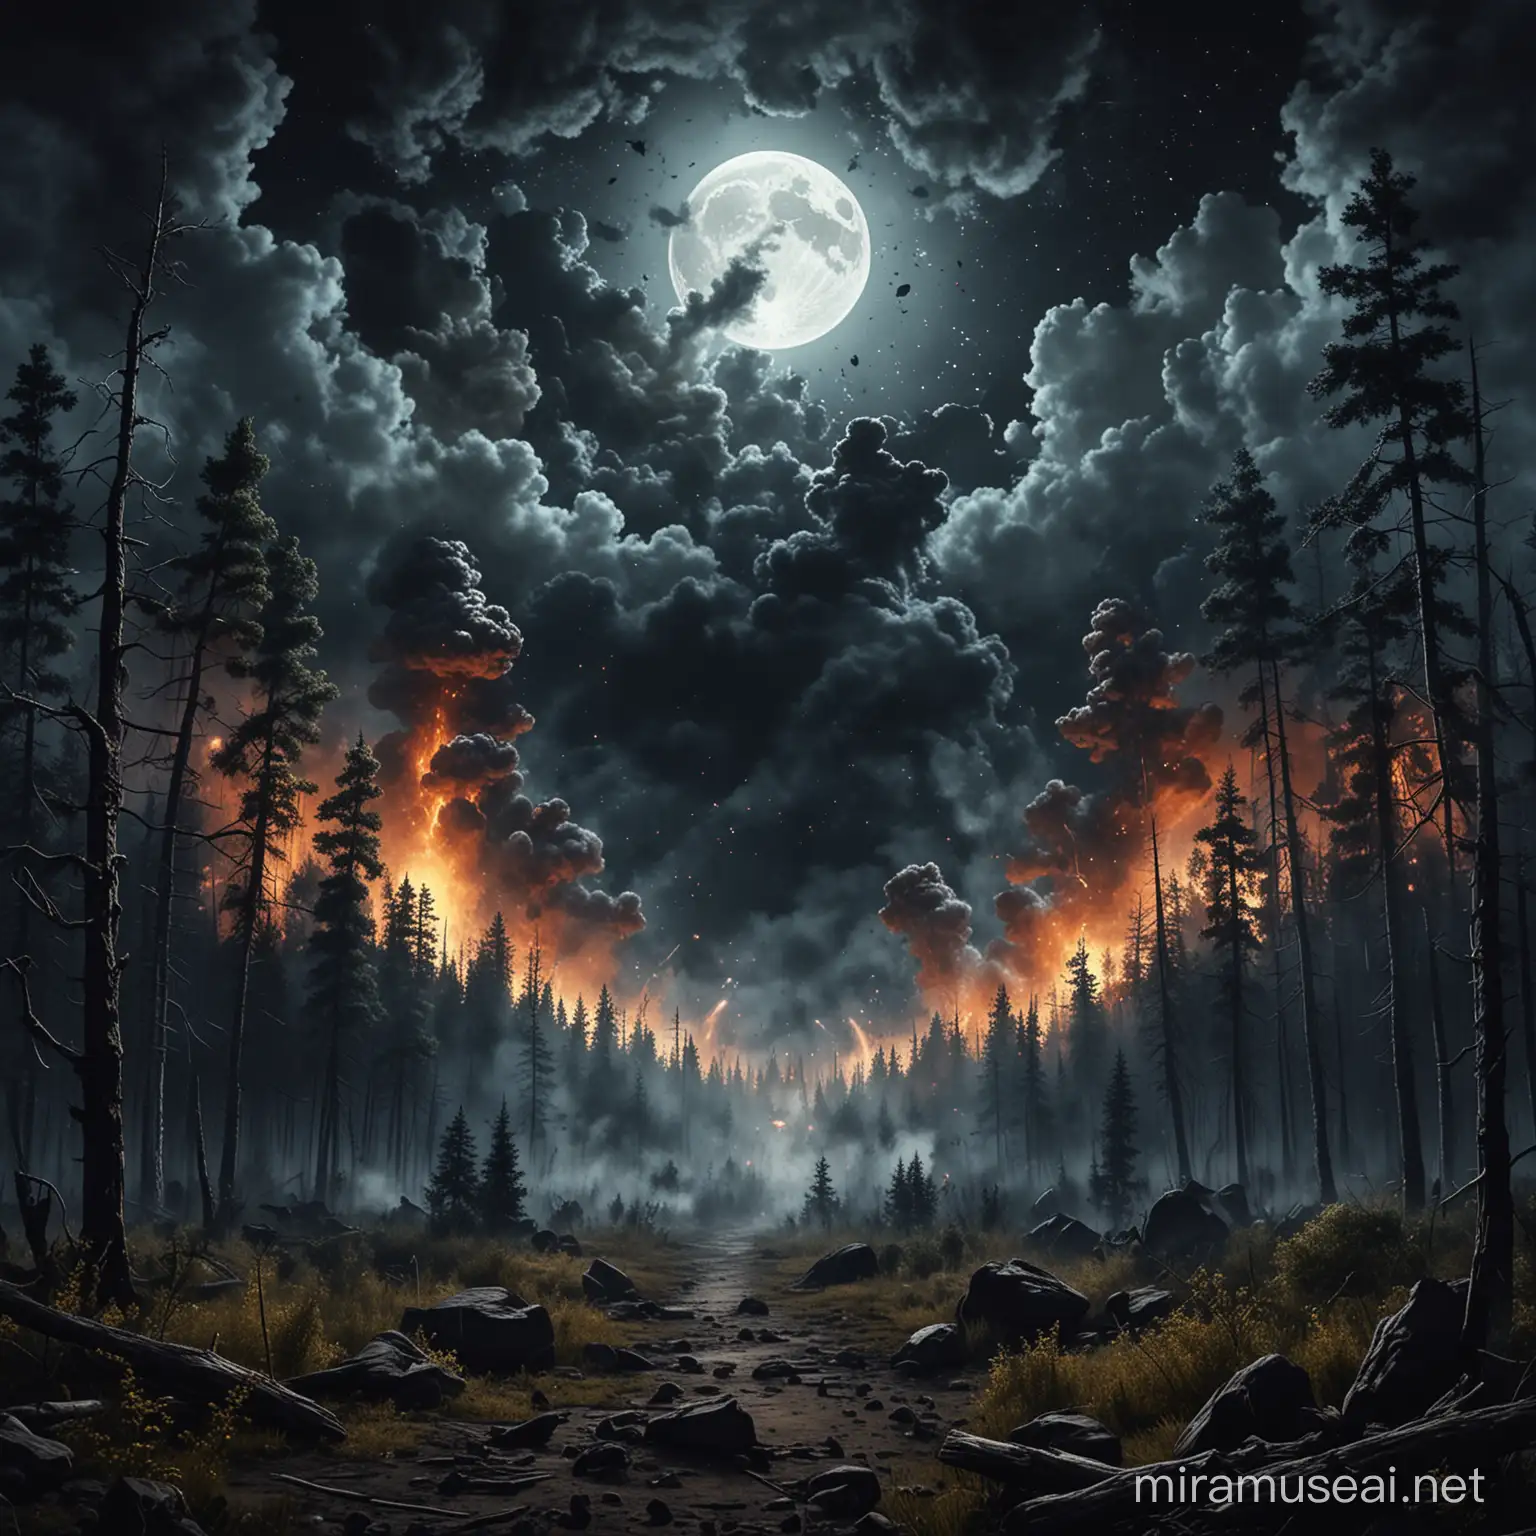 Night, a forest, a big moon behind the forest, an big explosion with smoke. Everything is depicted with a stroke